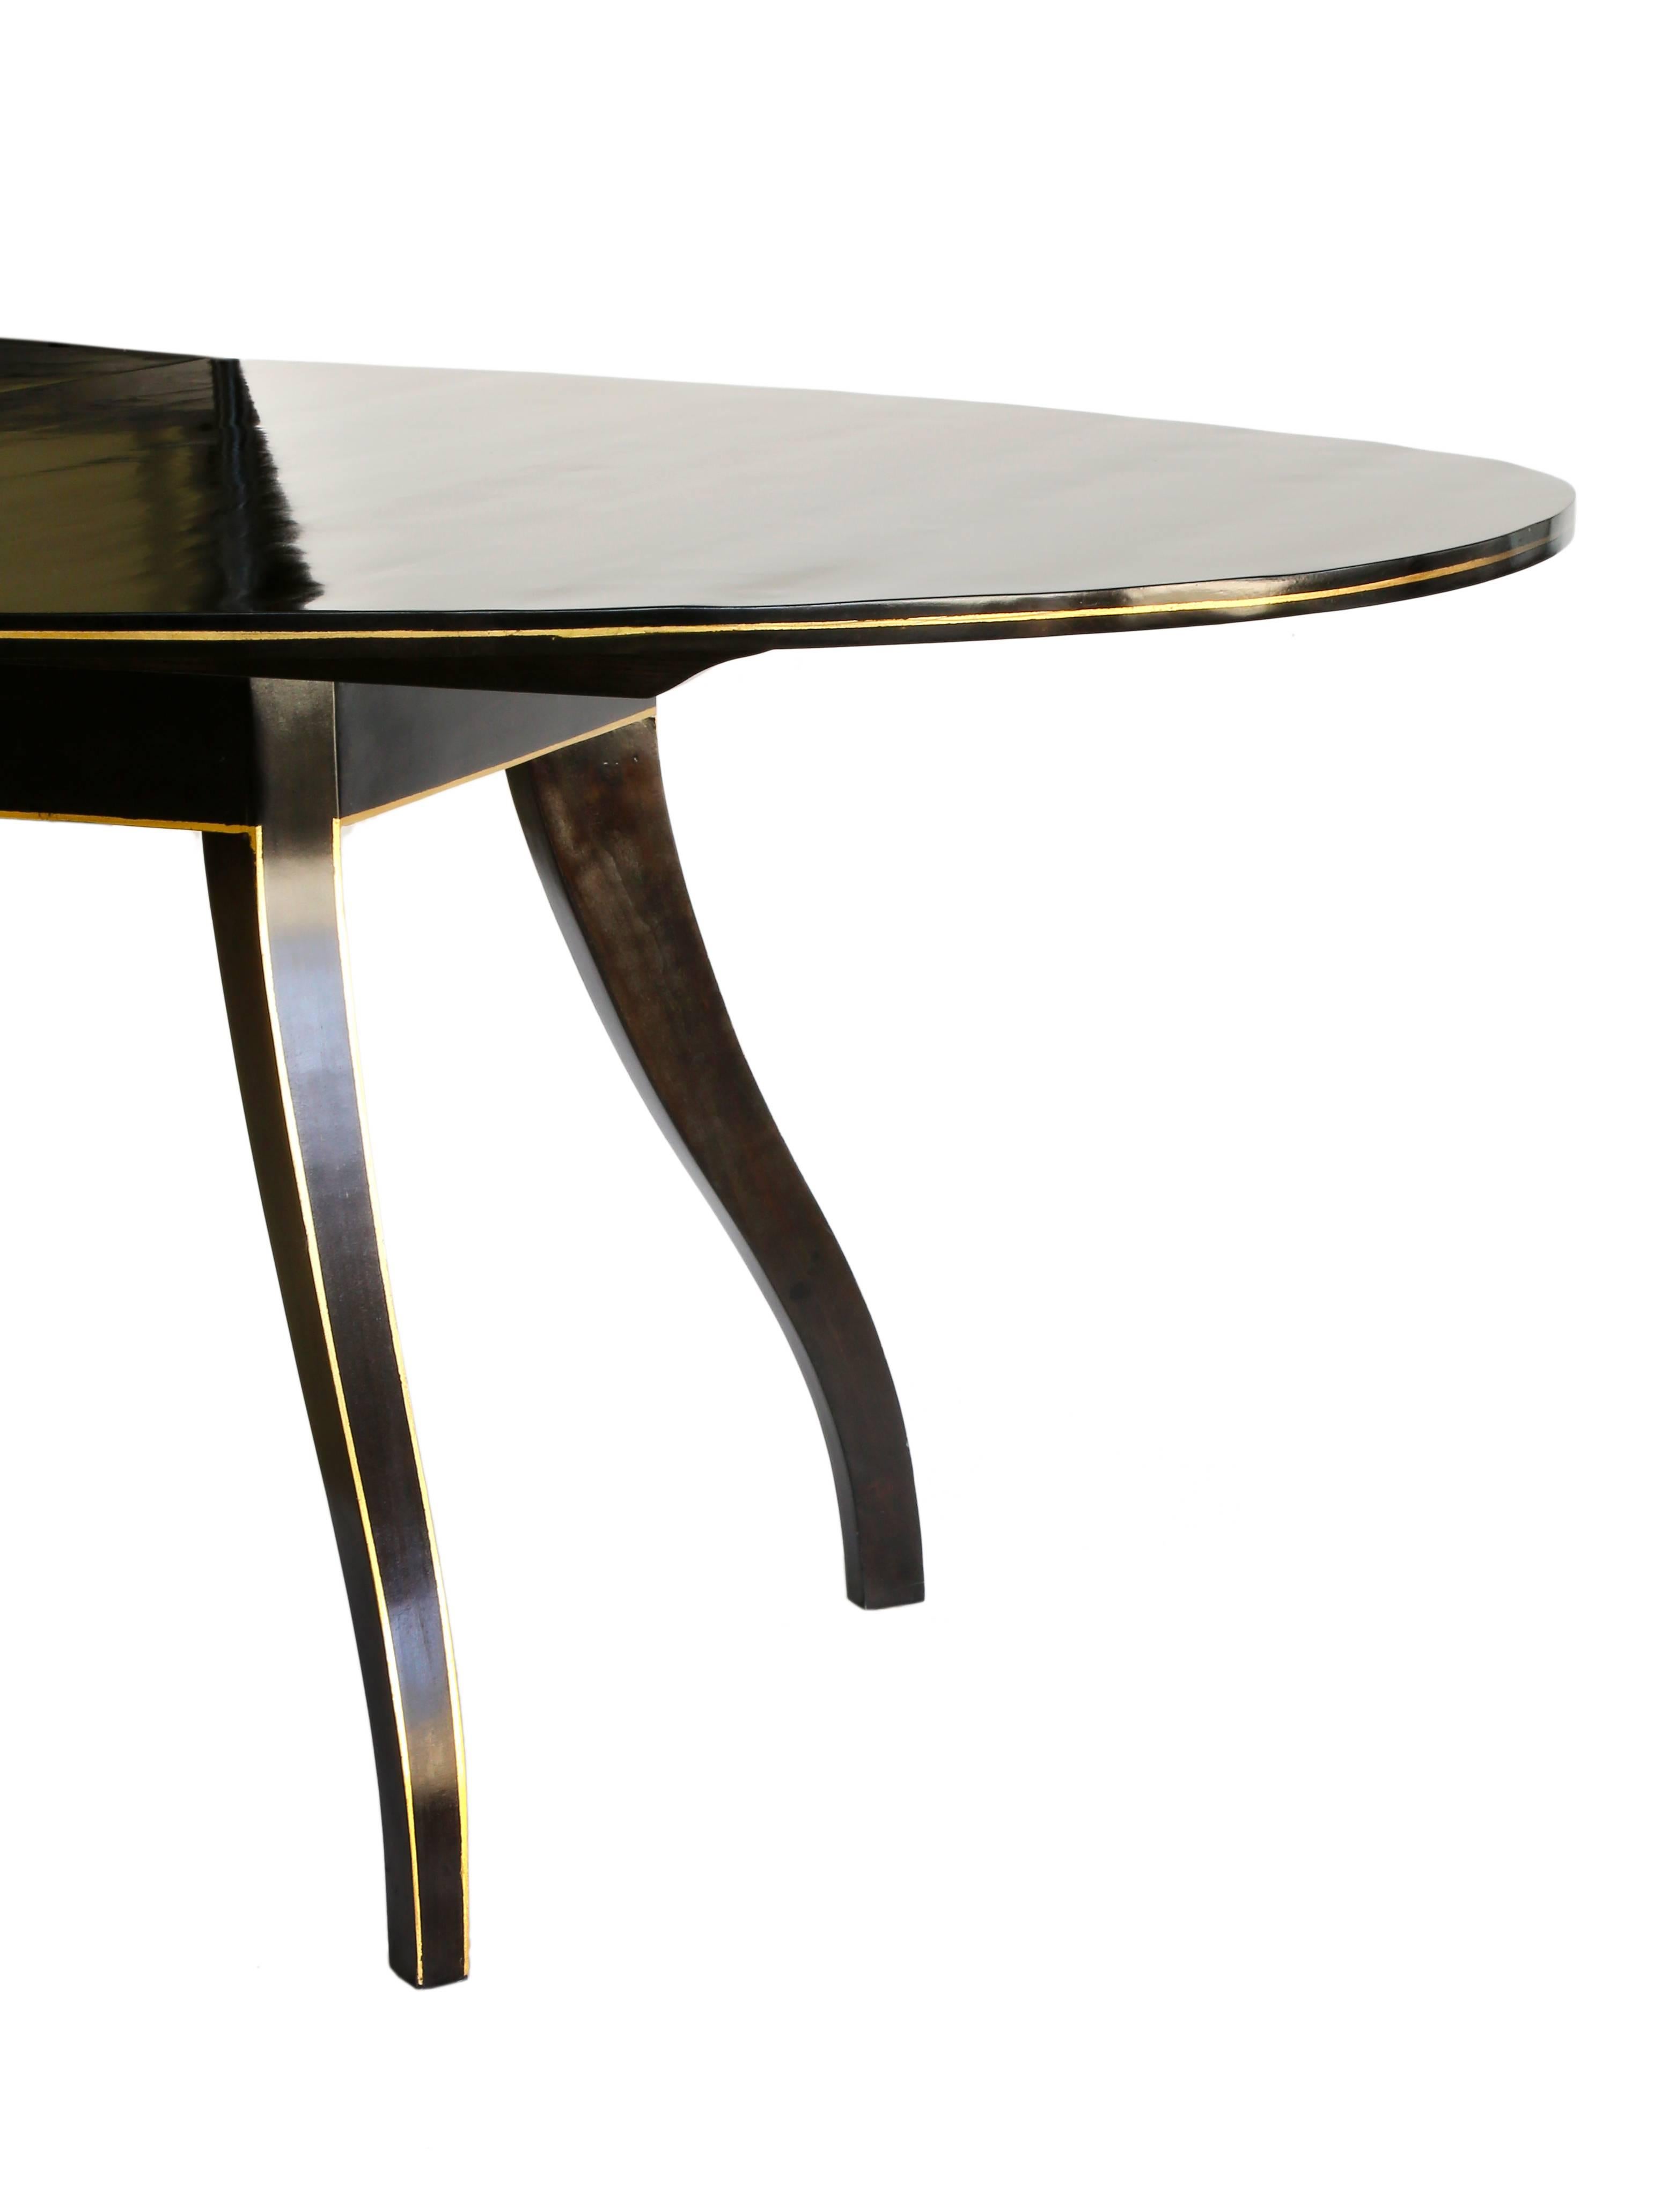 An extension dining table designed by Phoebe Howard in dark ebony stained wood. The table features Regency style spider legs with a painted 23-karat gilt banding detail on the edge of the leg and along the edge of the table. This table style is no